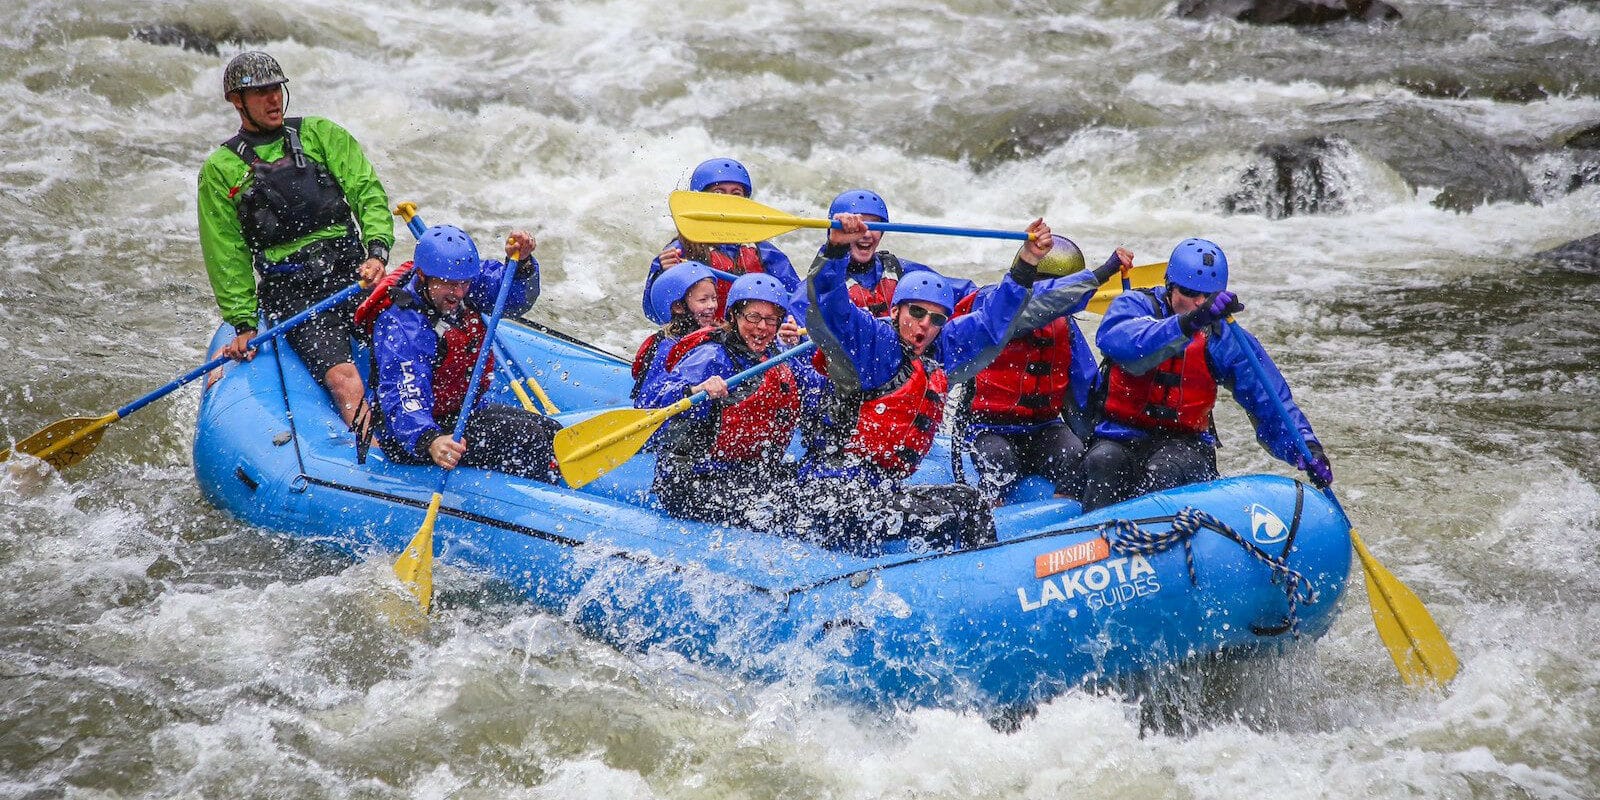 Image of people whitewater rafting in Colorado